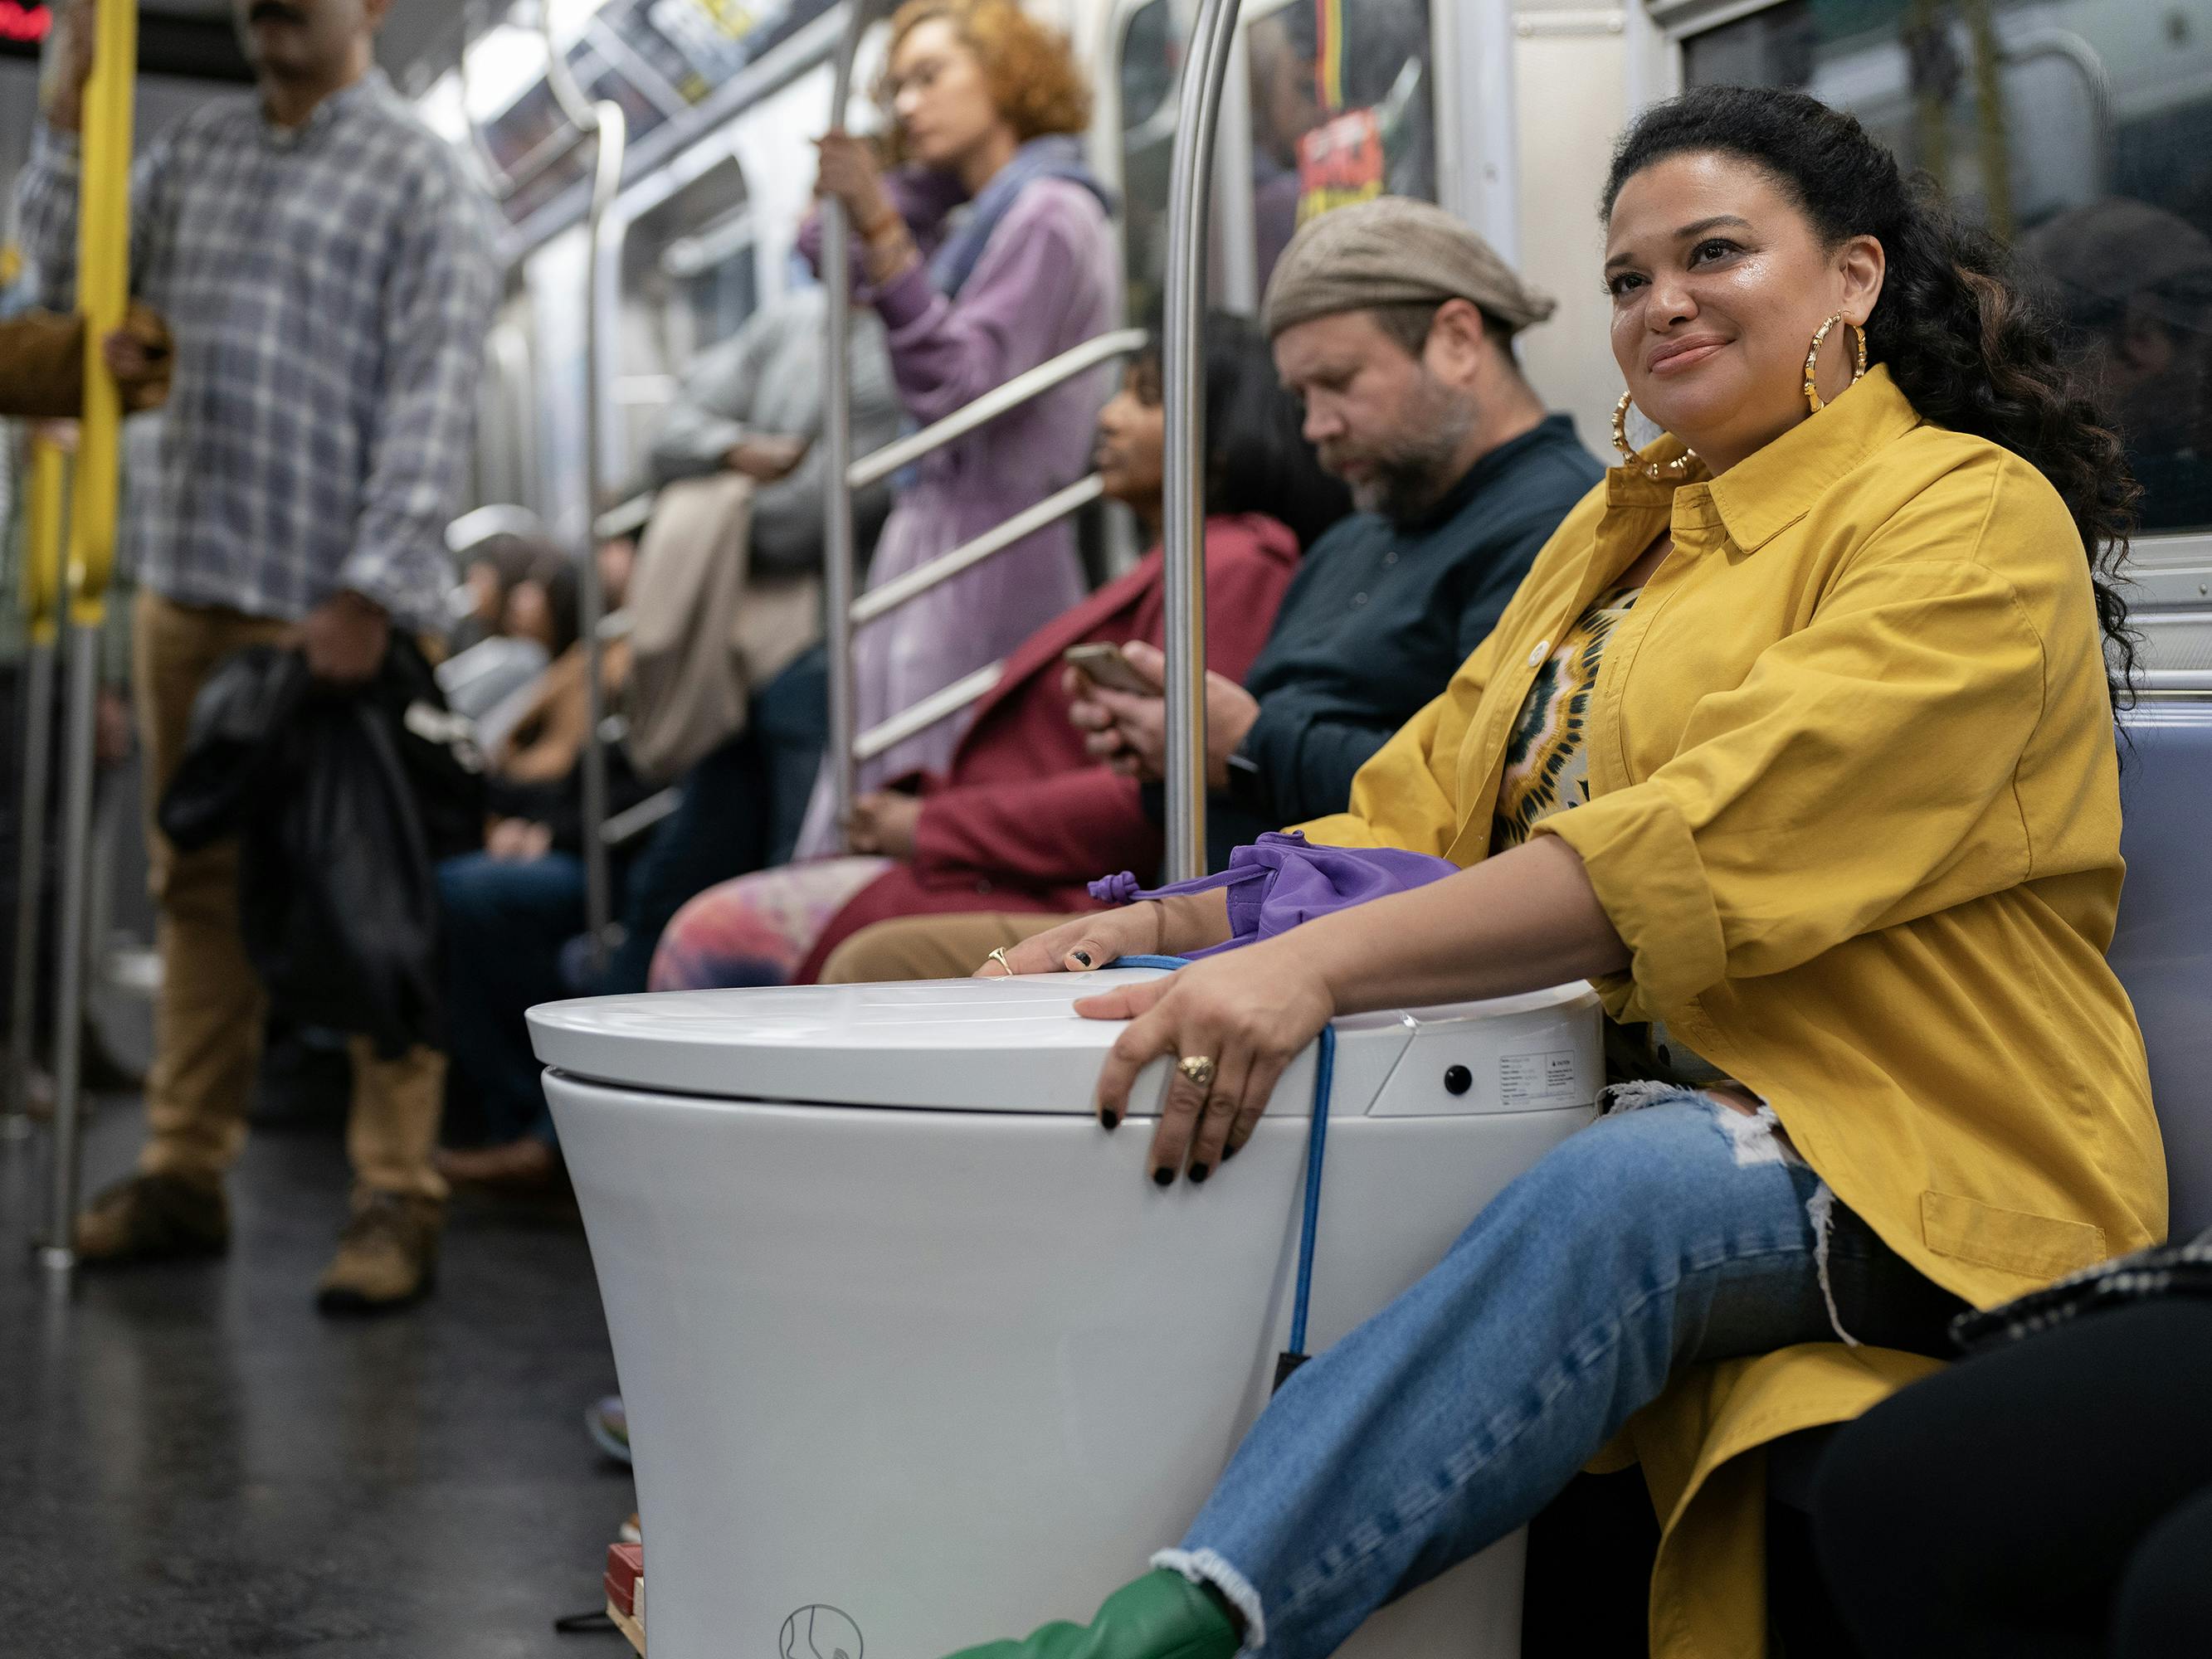 Mavis (Michelle Buteau) in Survival of the Thickest wears jeans, a yellow raincoat, and green shoes on the subway, straddling a toilet. 